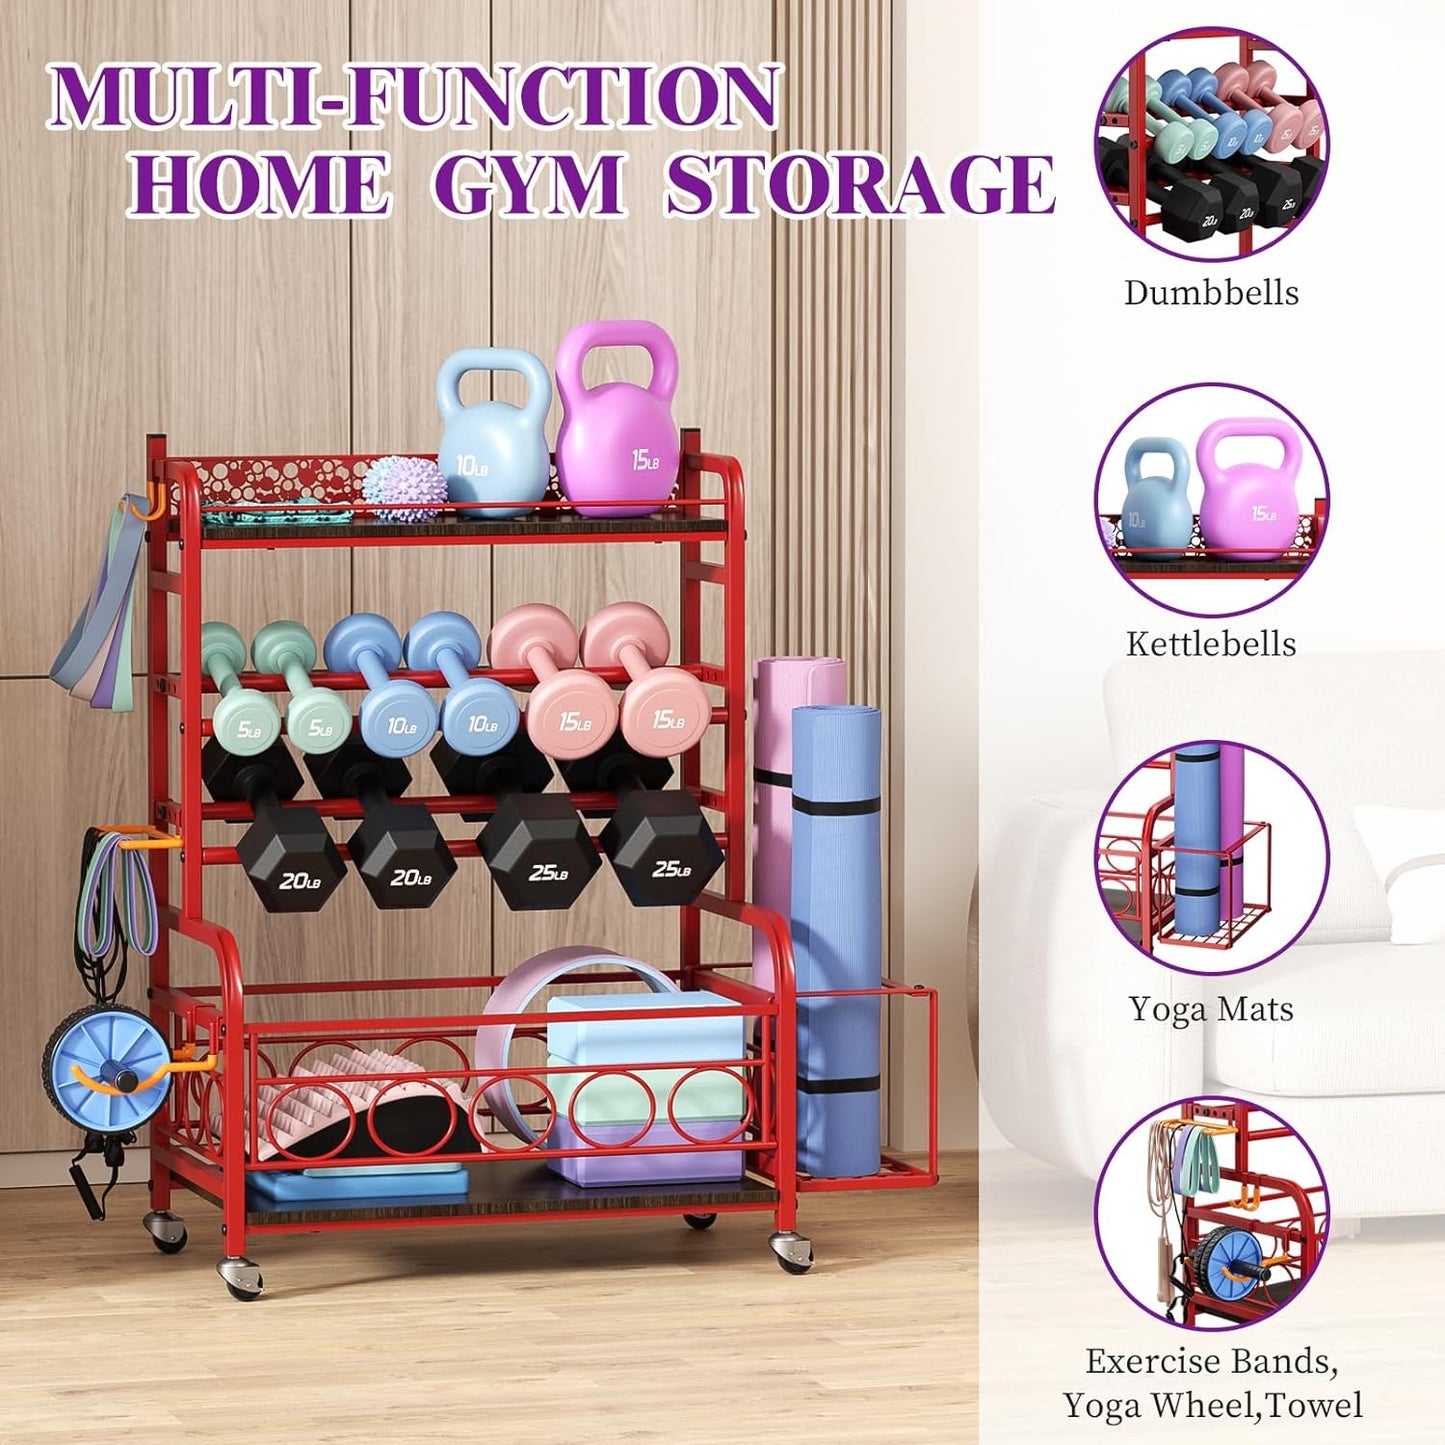 Weight Rack for Dumbbells, Dumbbell Rack Weight Stand,  Home Gym Storage Rack for Yoga Mat Kettlebells and Strength Training Equipment, Weight Storage Holder Rack for Dumbbells with Wheels